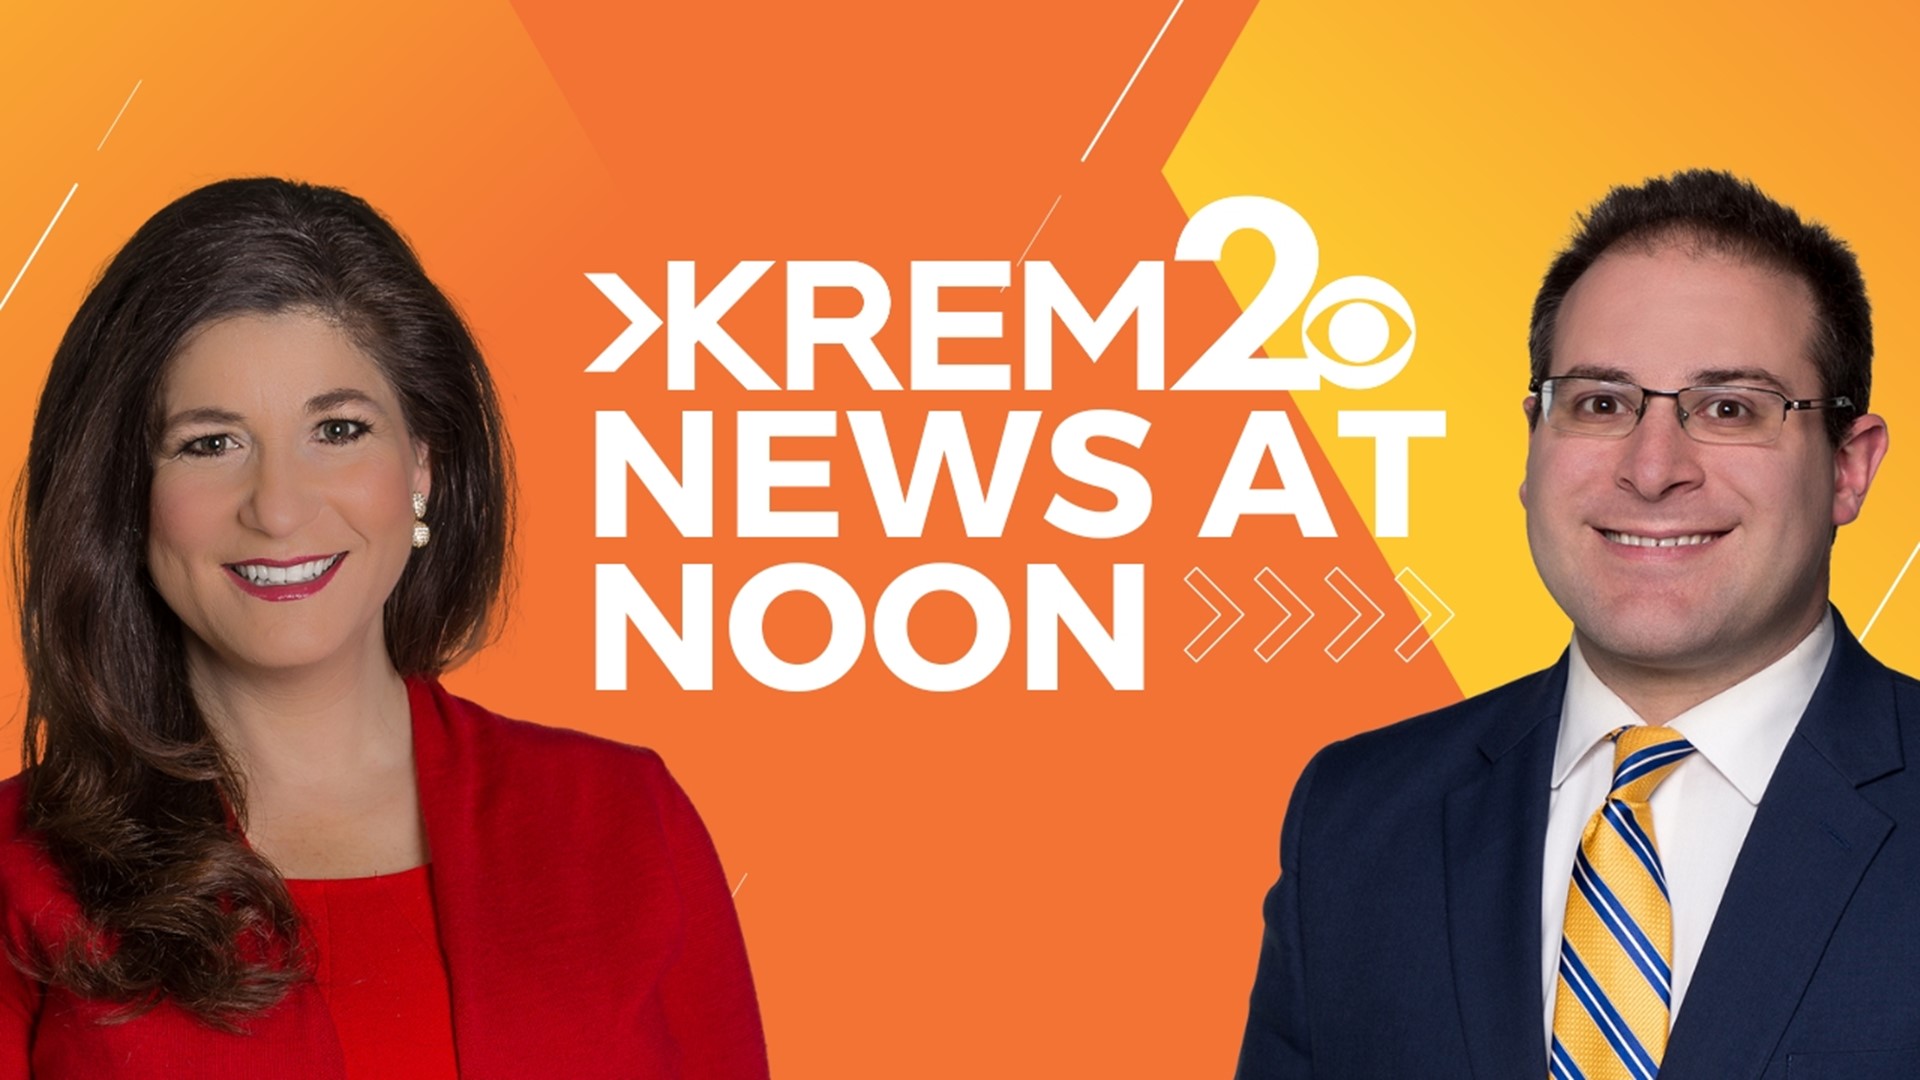 An update on the Moscow Murder case, One Spokane Stadium, and more at KREM 2 News at Noon.